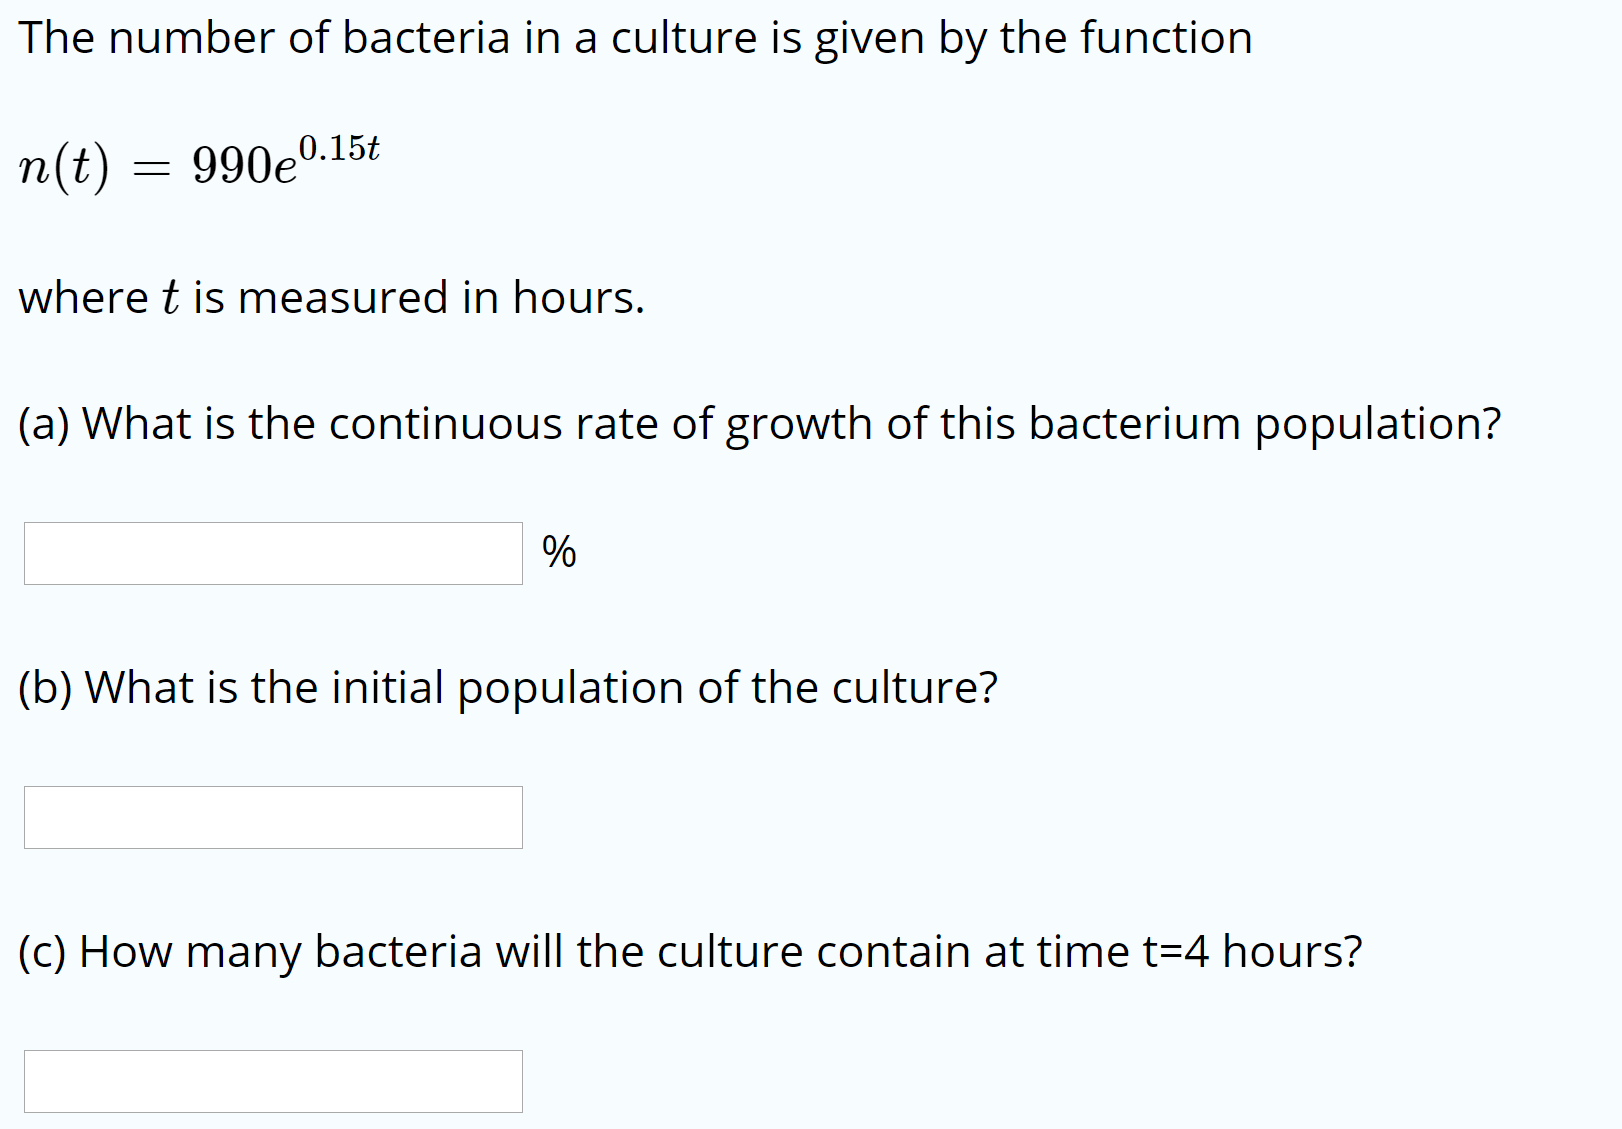 The number of bacteria in a culture is given by the function
n(t)
990e0.15t
where t is measured in hours.
(a) What is the continuous rate of growth of this bacterium population?
(b) What is the initial population of the culture?
(c) How many bacteria will the culture contain at time t=4 hours?
